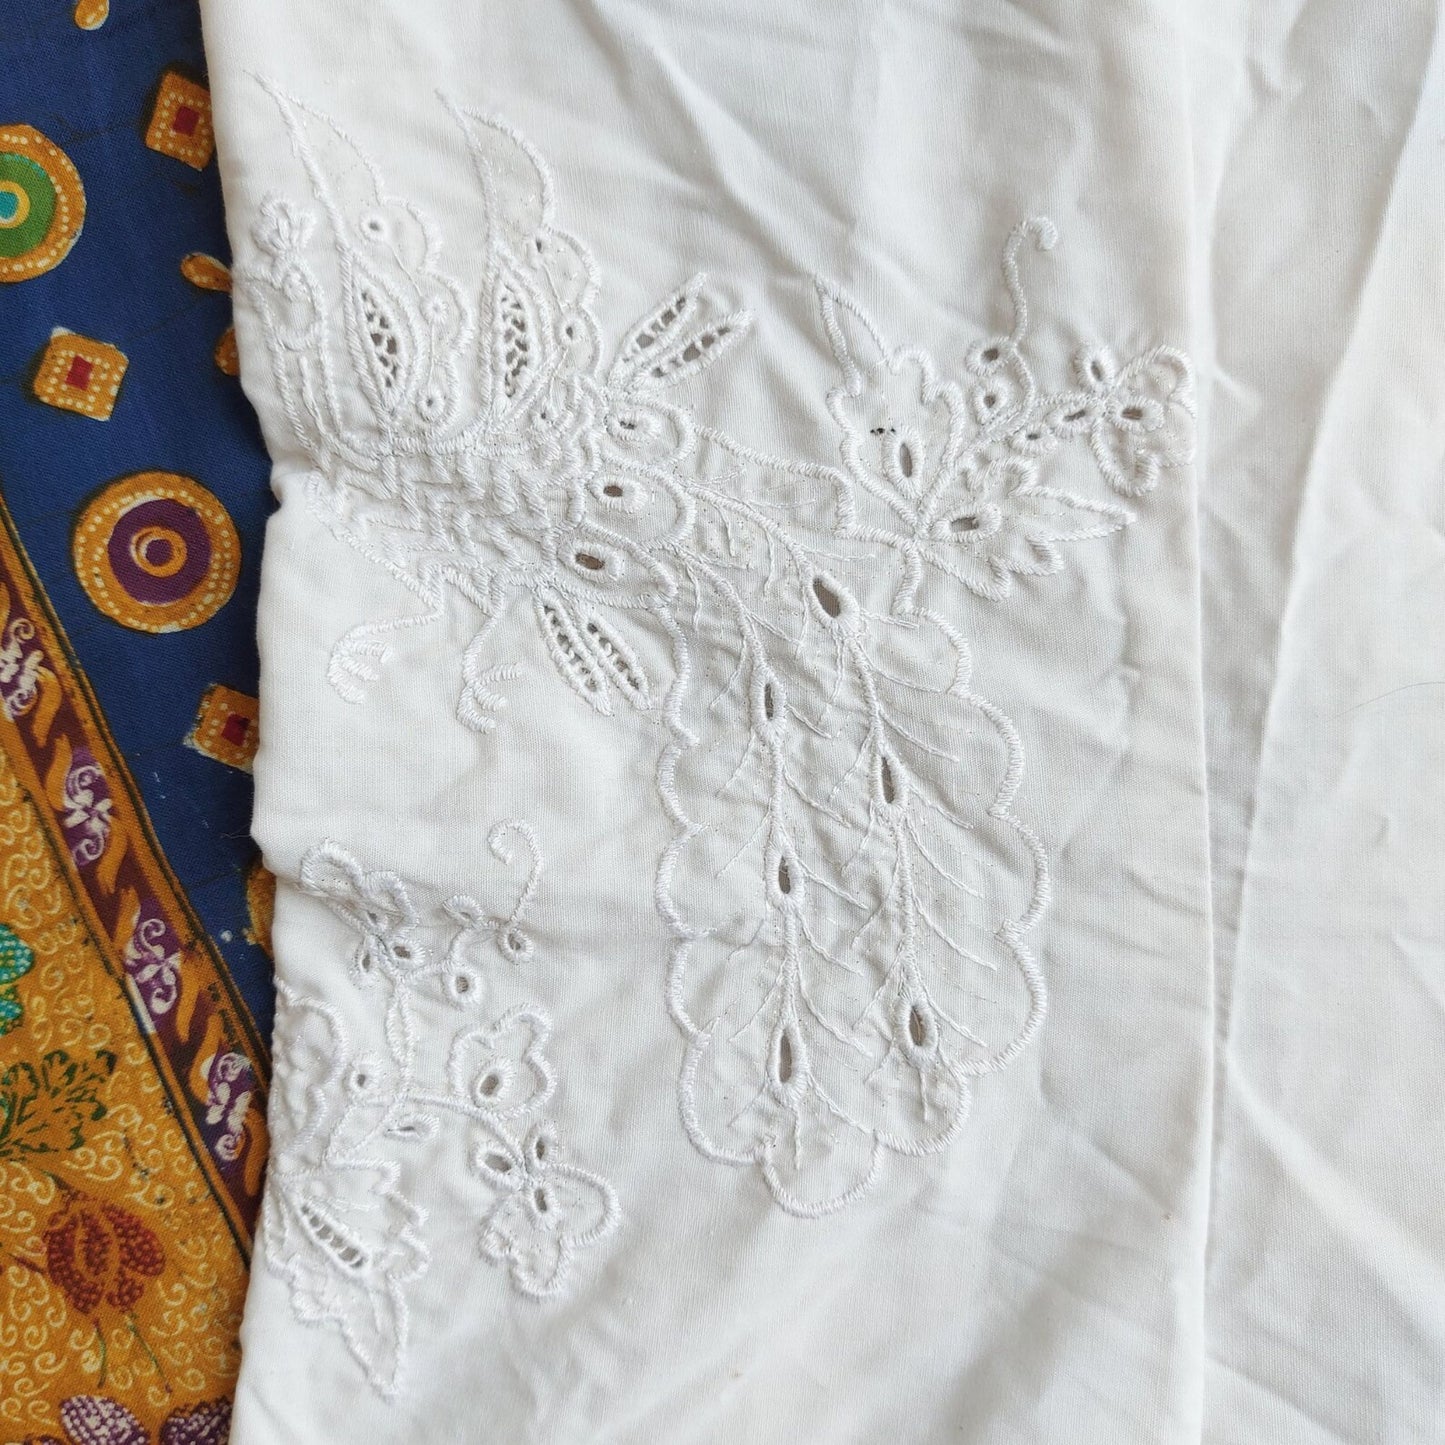 Indonesian Vintage White Camisole with Peacock Embroidery